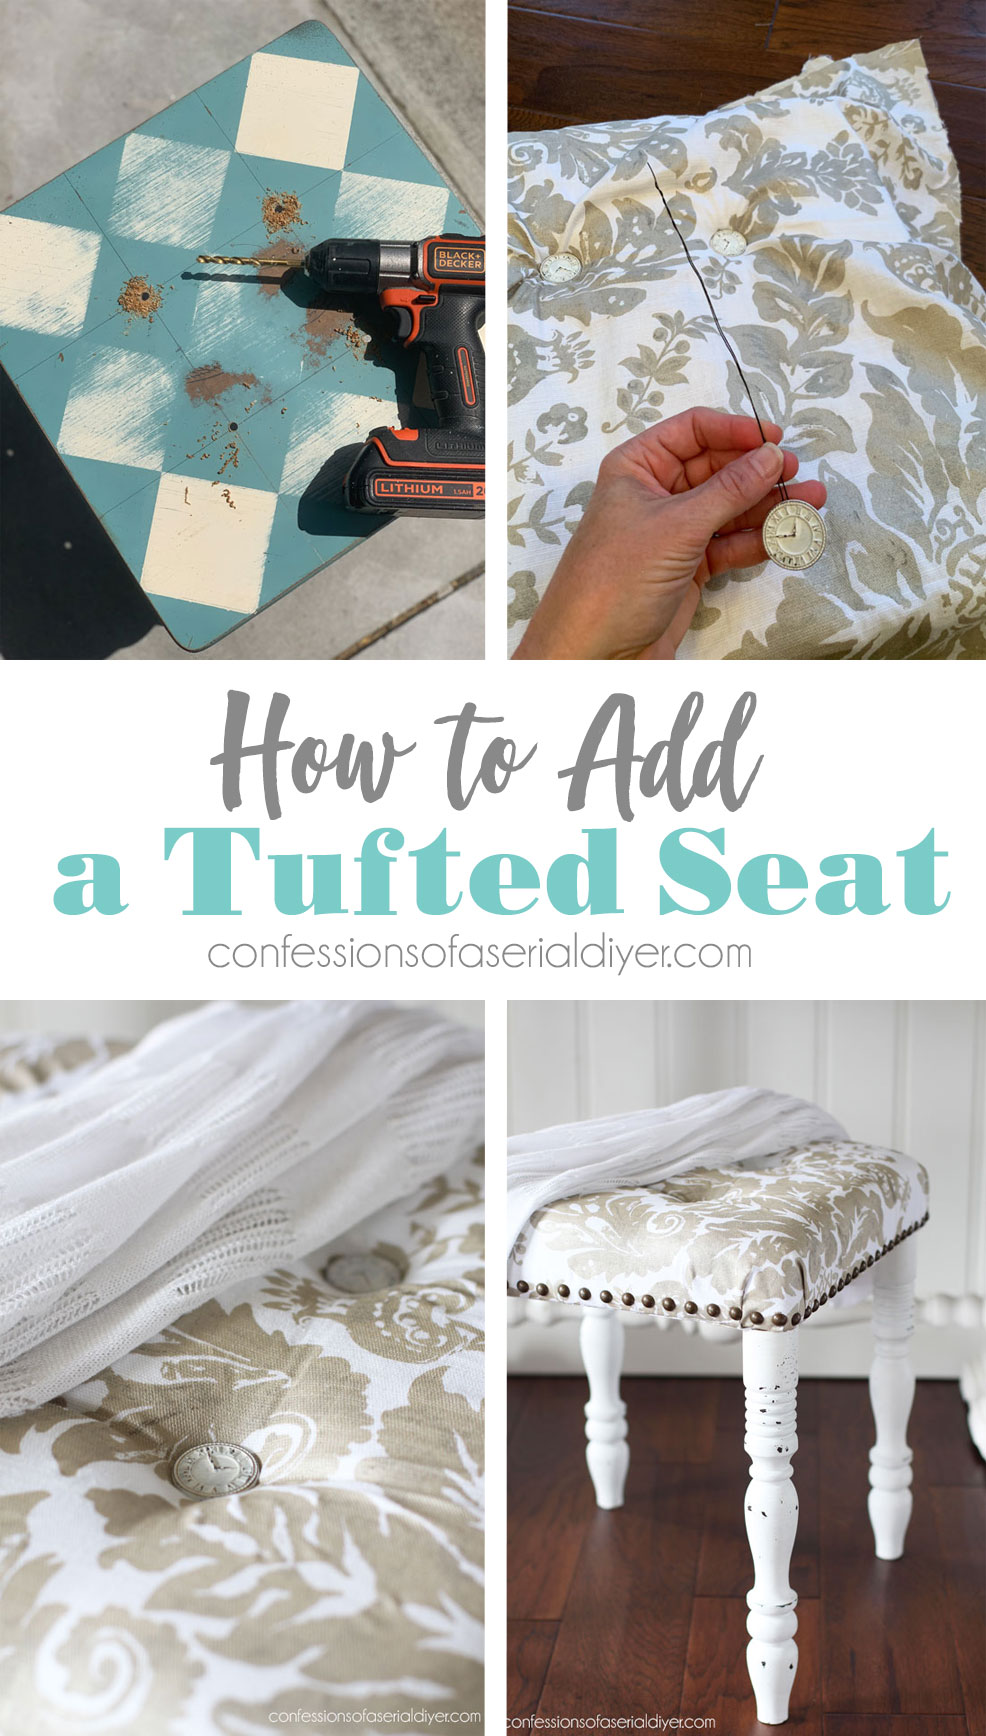 How to Add a Tufted Seat